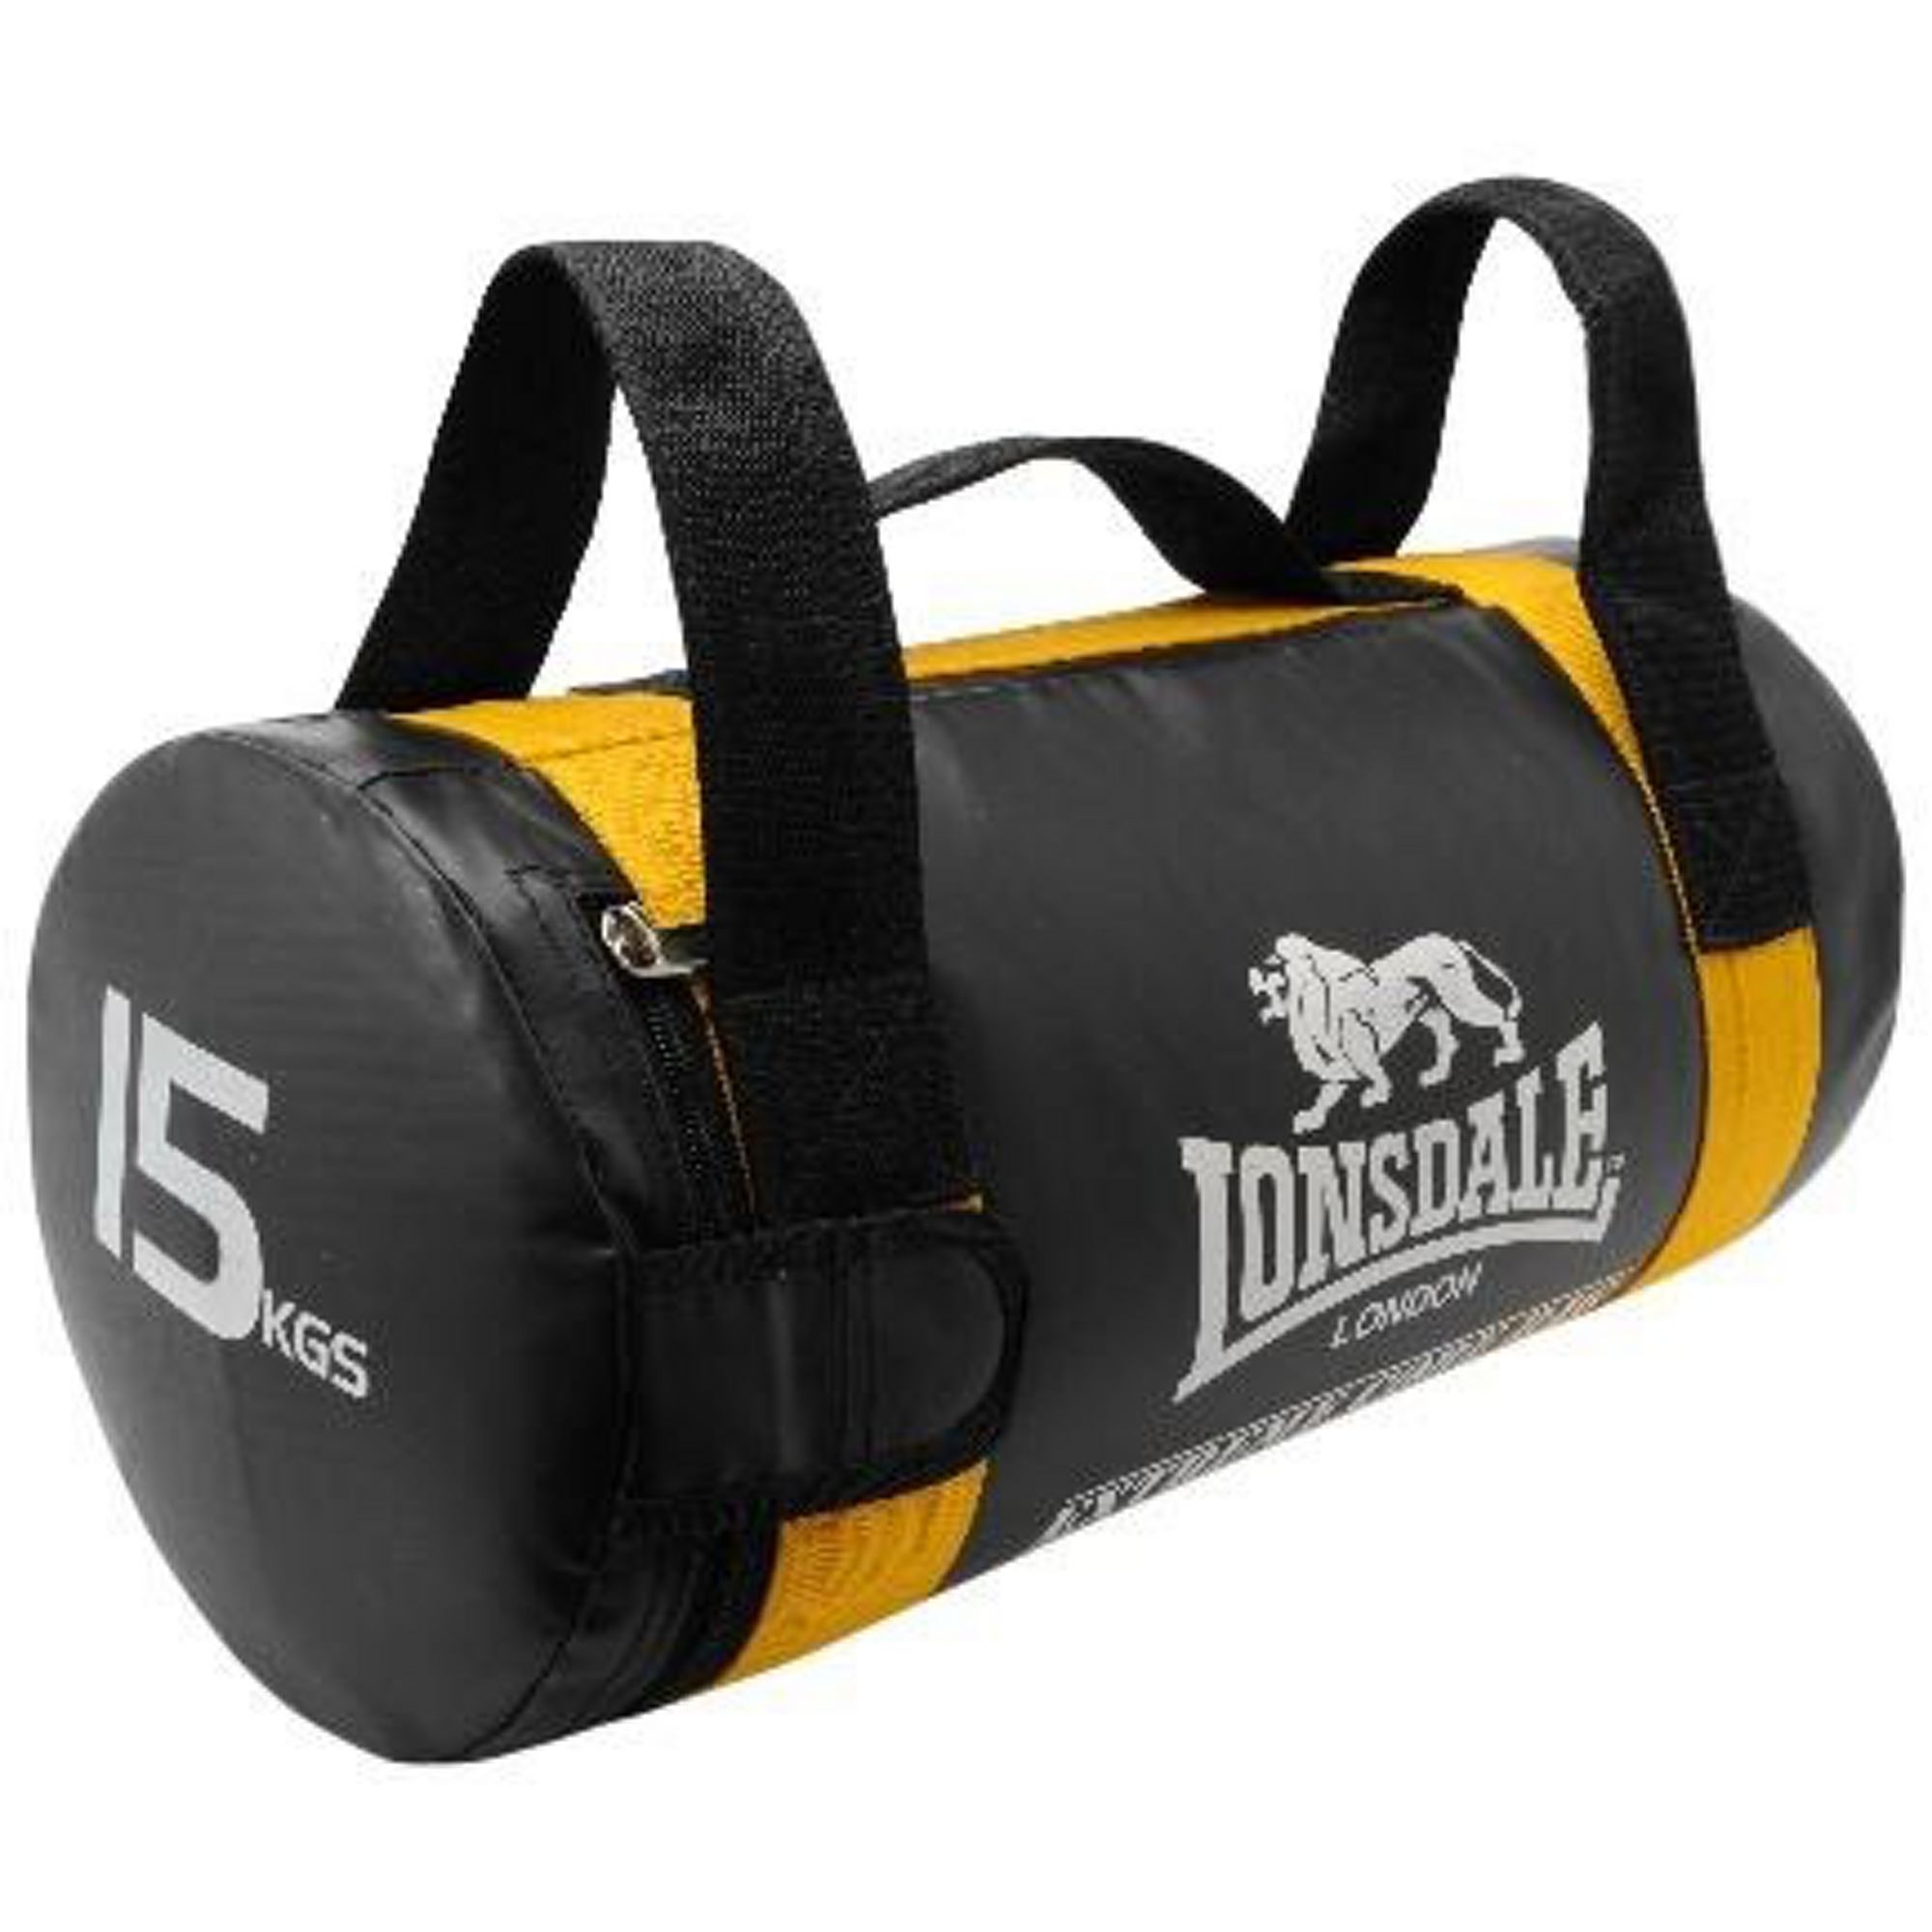 Lonsdale Extreme Core Bag 15kg Yellow